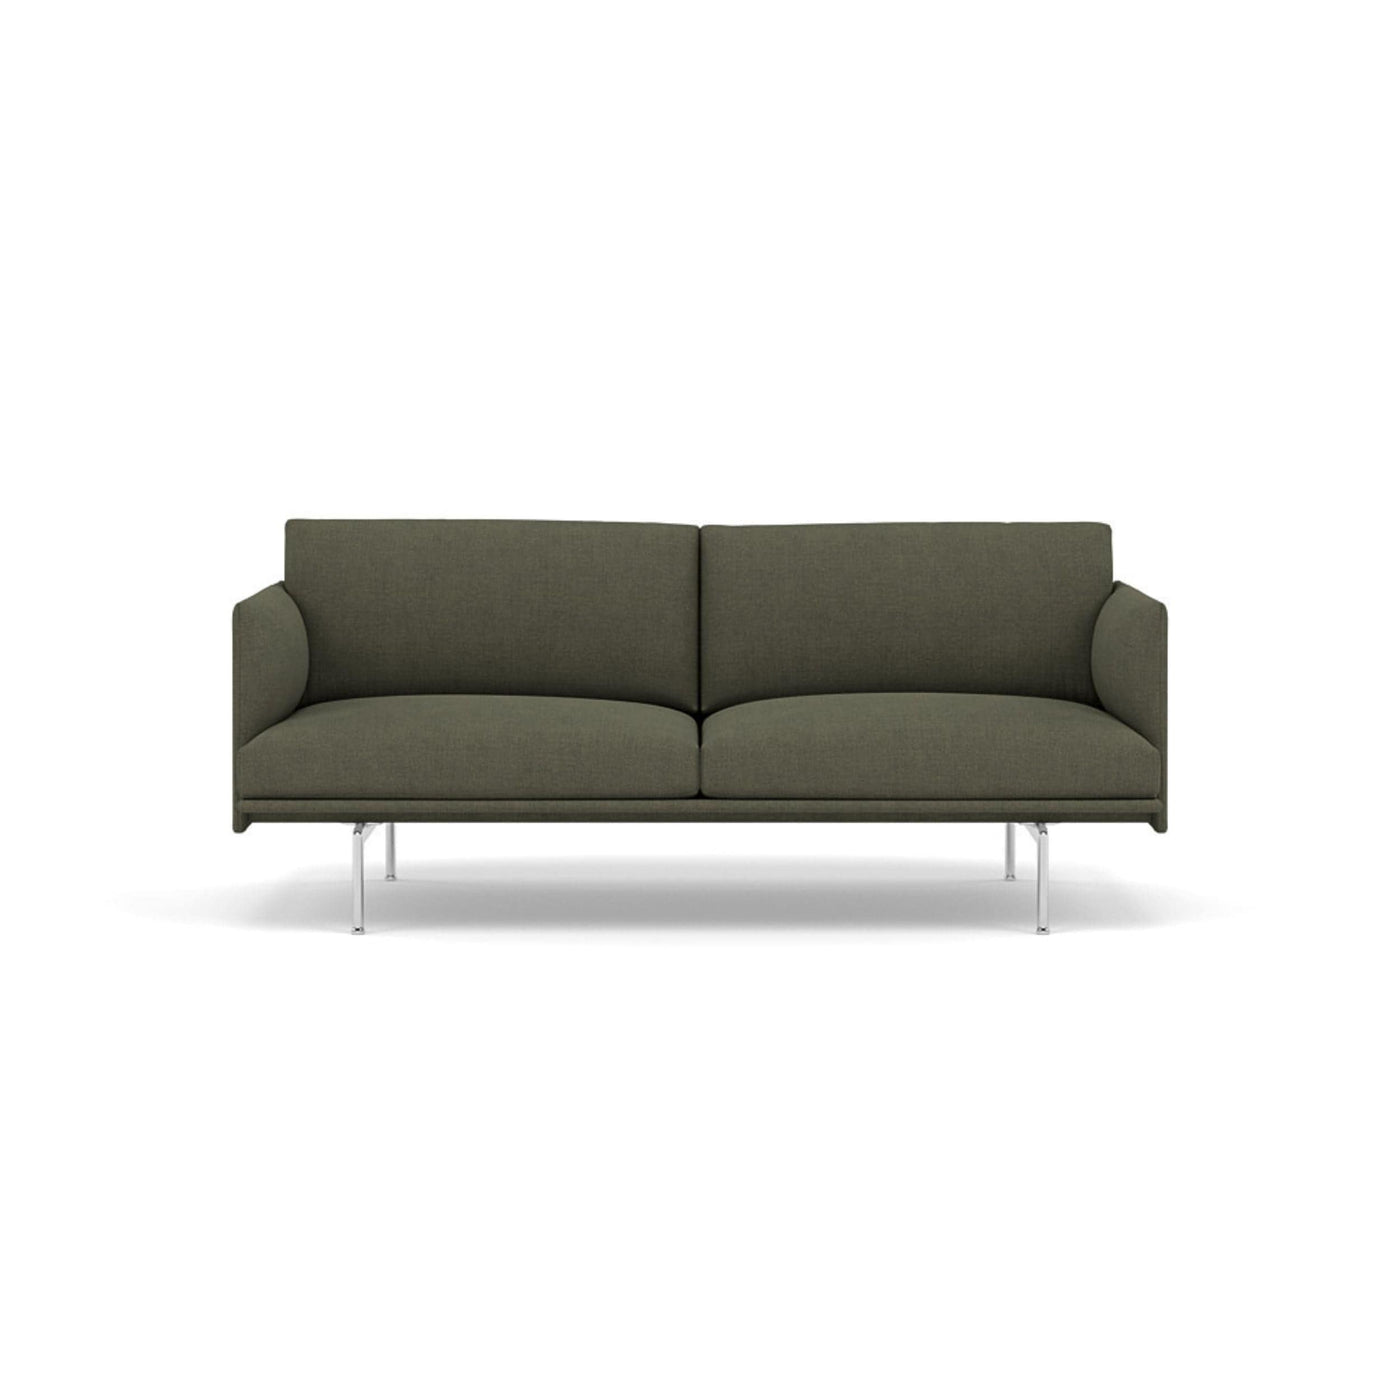 Muuto Outline Studio Sofa 170 in Fiord 961 and polished aluminium legs. Made to order from someday designs. #colour_fiord-961